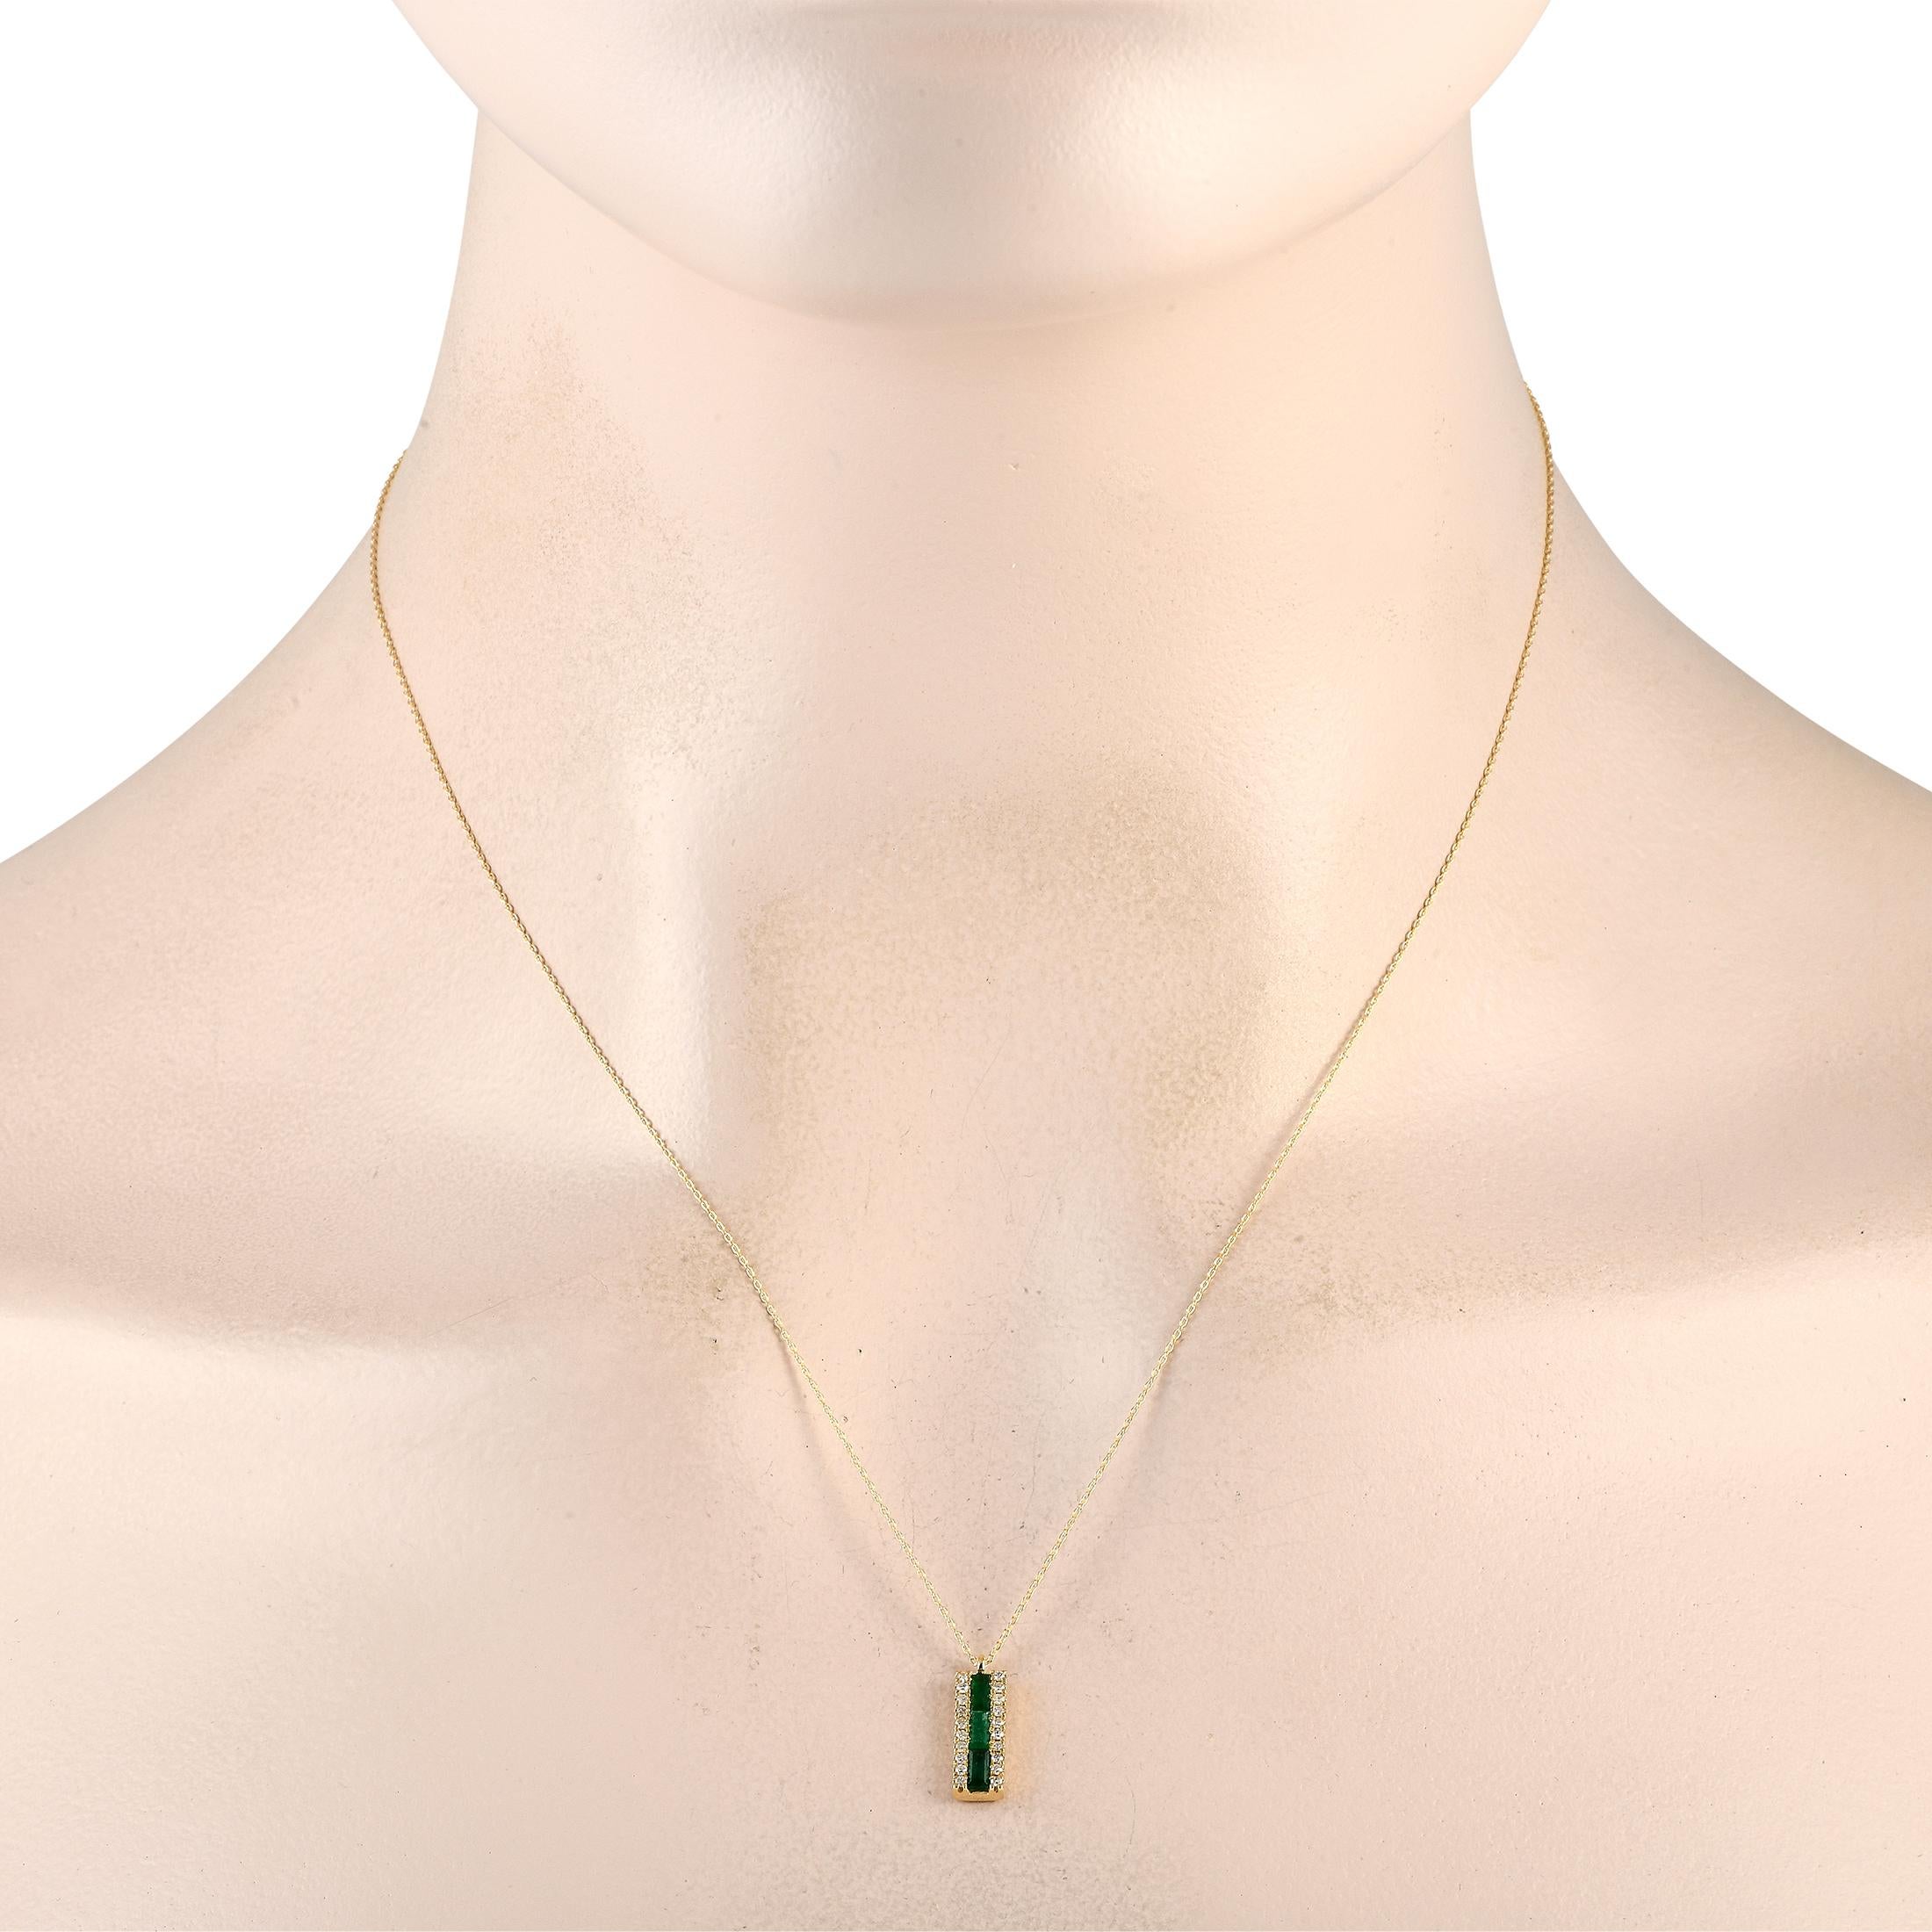 This timeless necklace will never go out of style. At the center of the 14K Yellow Gold pendant, youll find a series of Emerald gemstones flanked by round-cut Diamonds totaling 0.10 carats. The pendant measures .65 long by 0.20 wide and is suspended